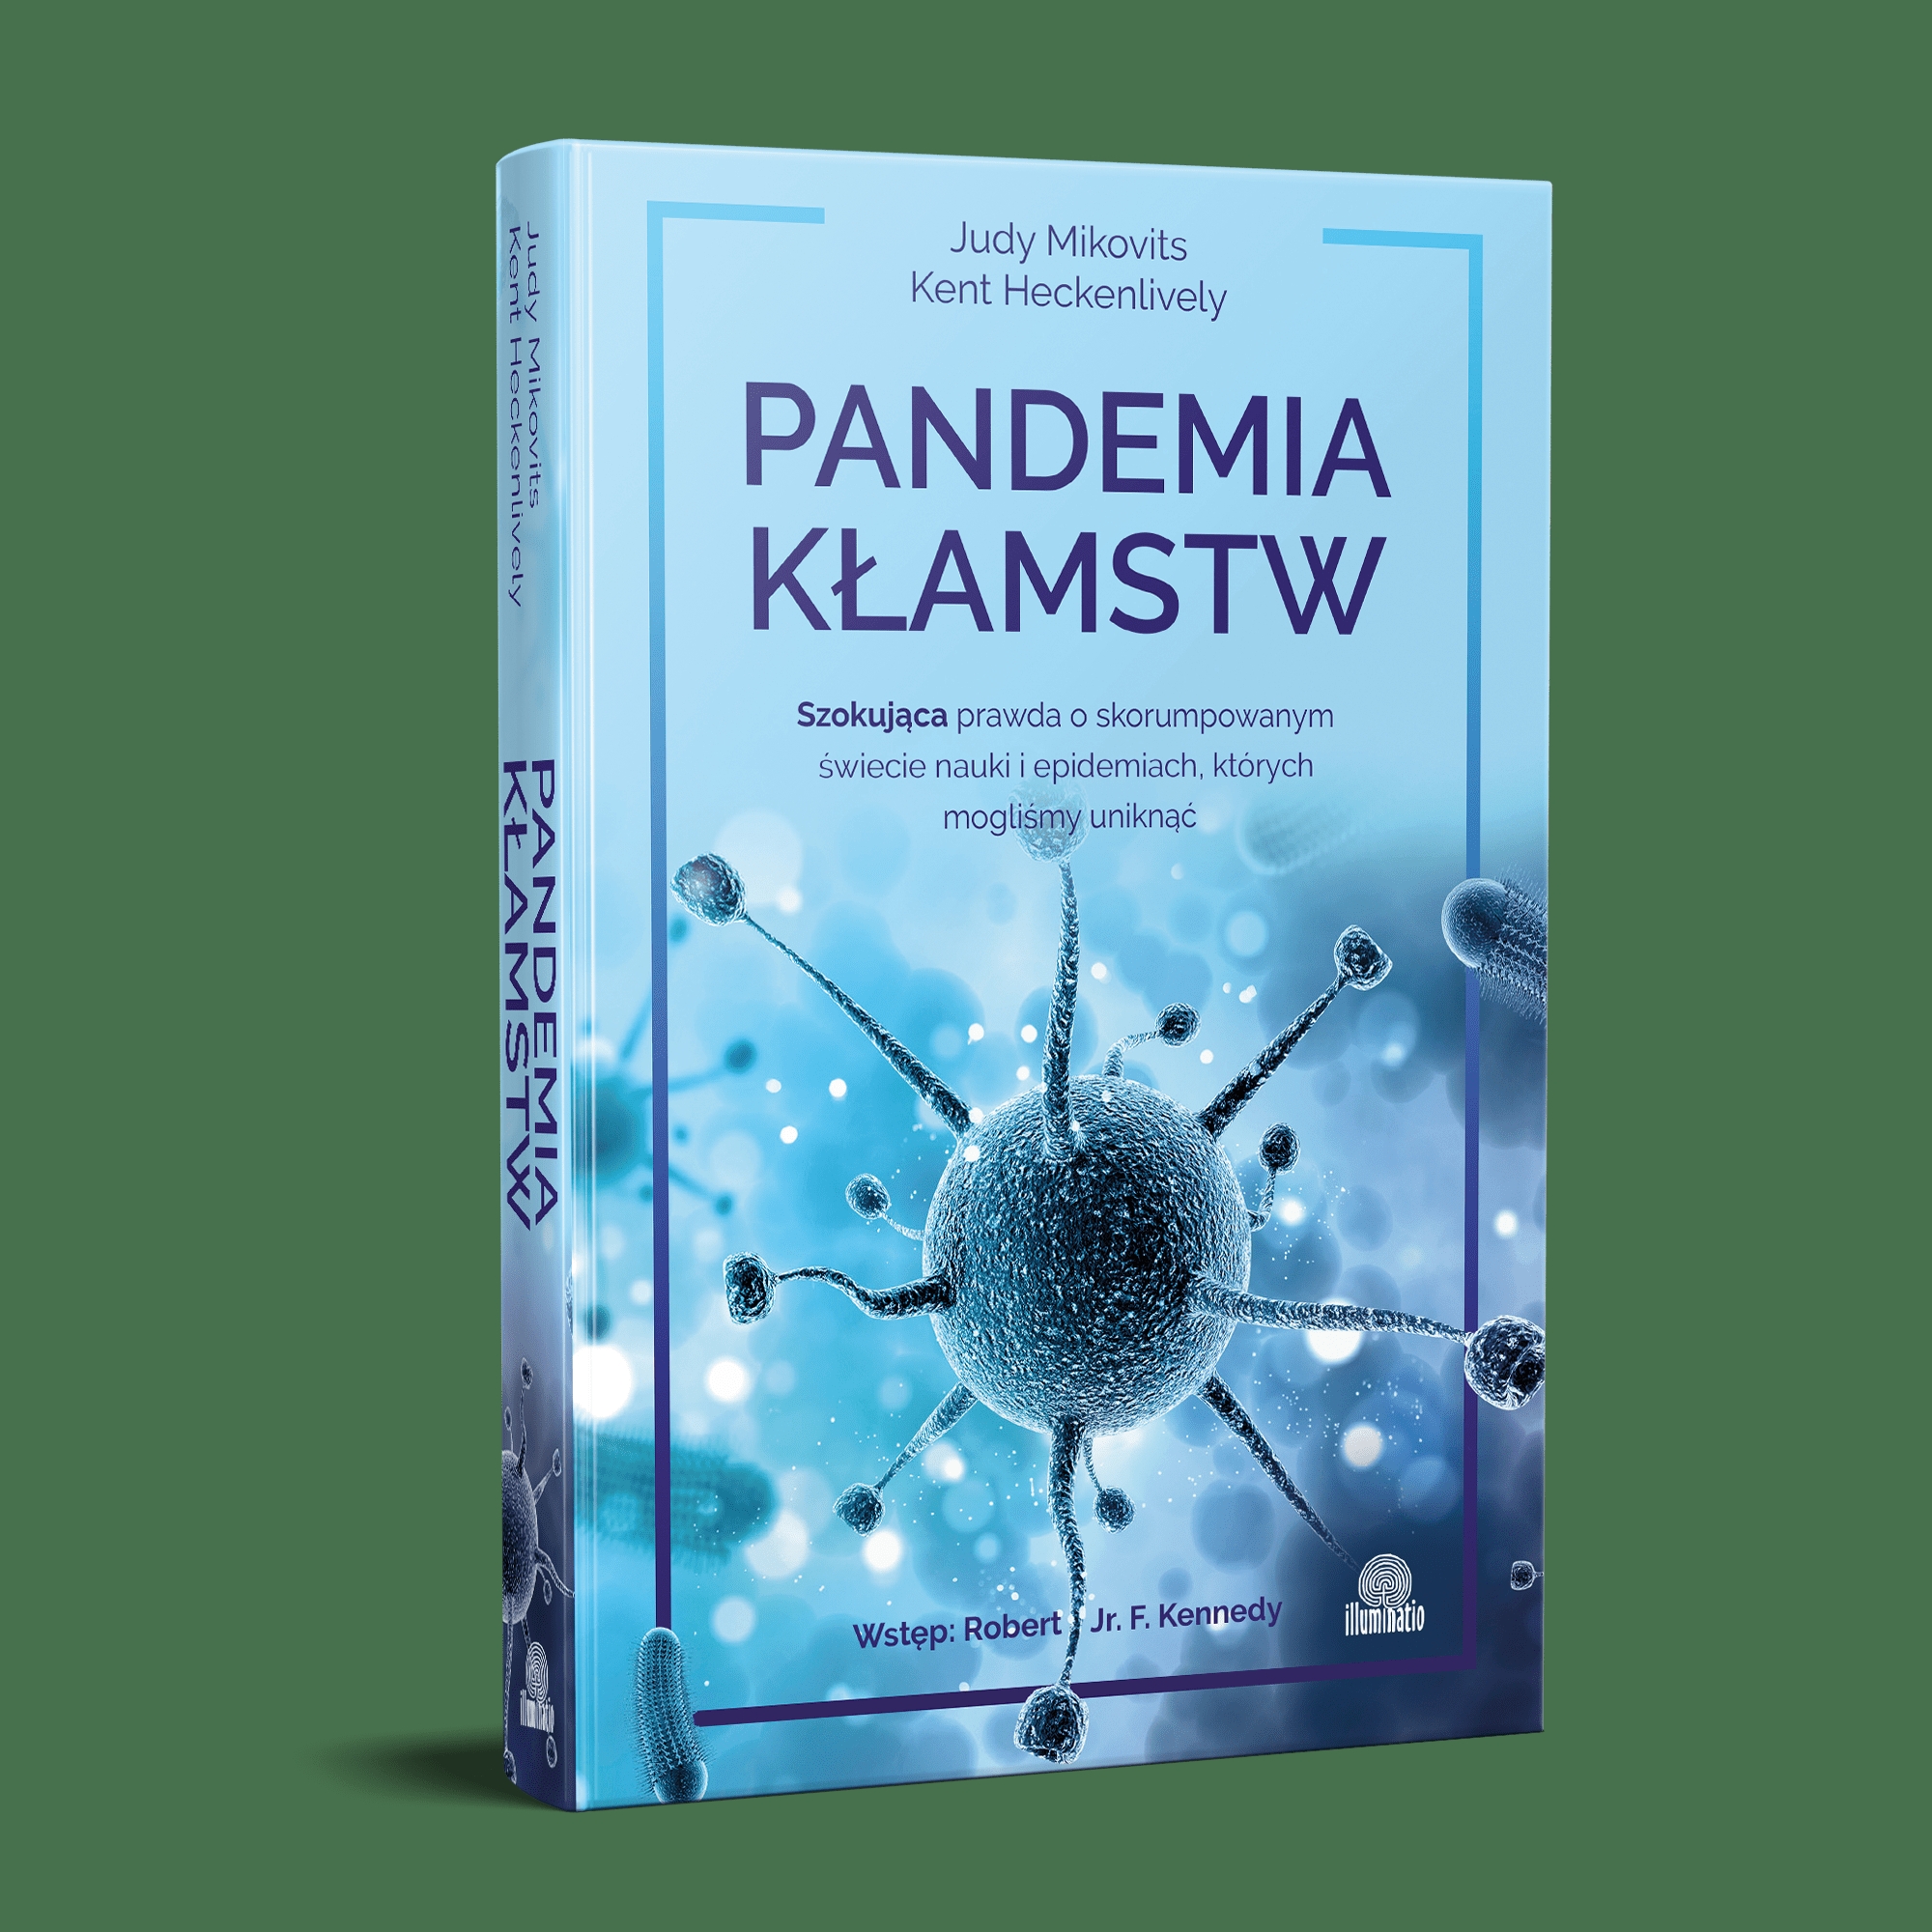 Pandemia kłamstw. Mikovits Judy, Heckenlively Kent